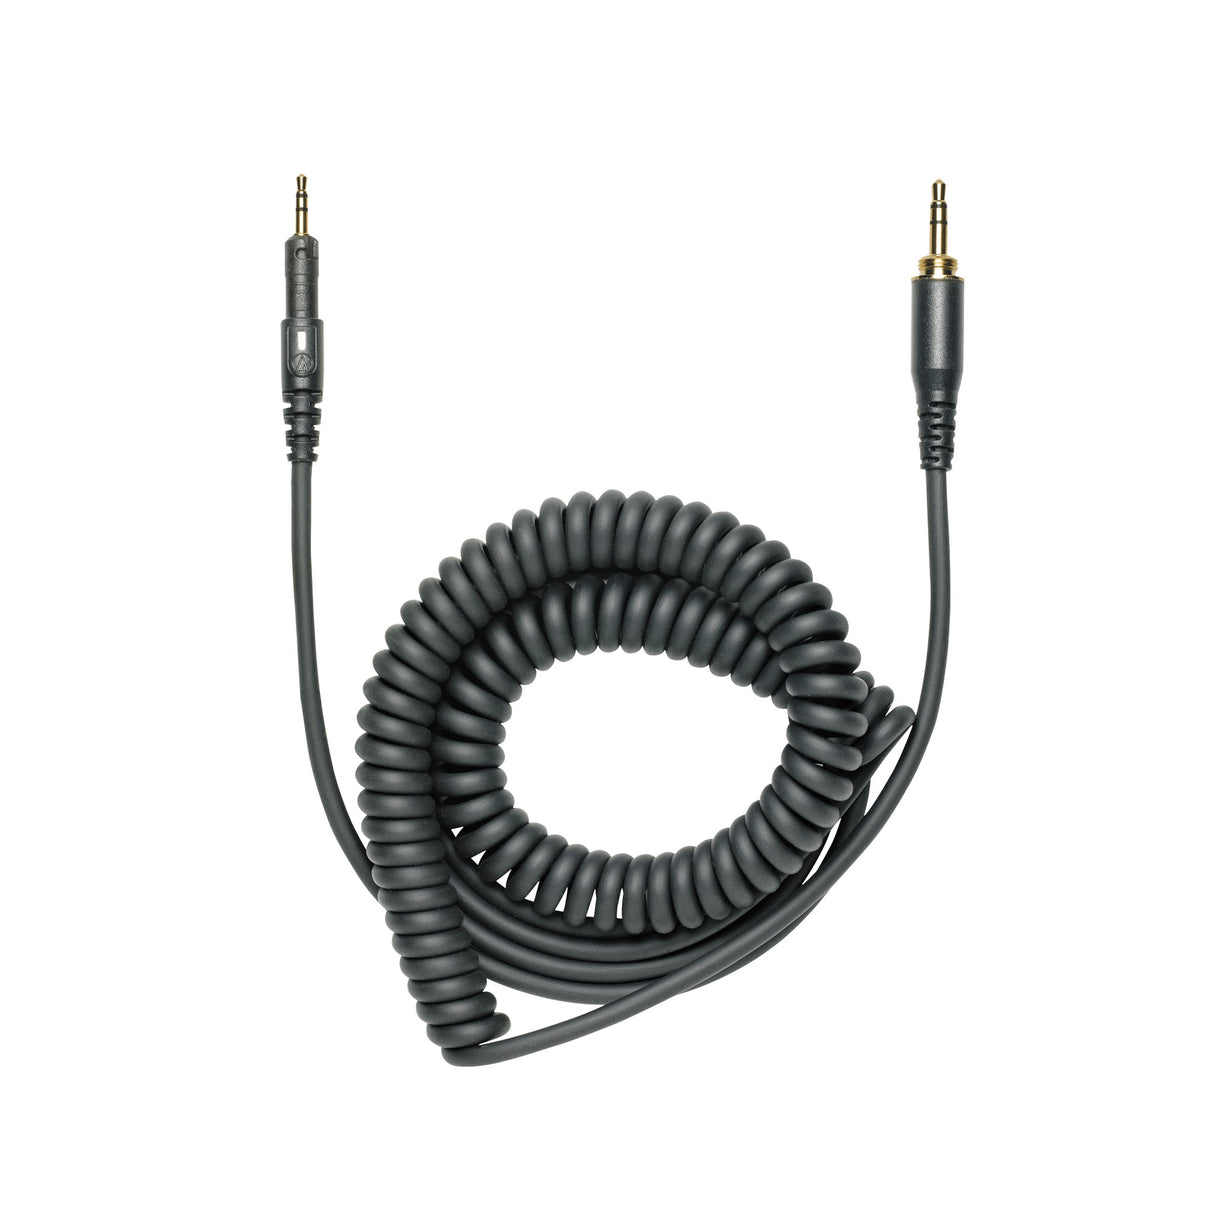 Audio-Technica ATH-HPCC Replacement Cable for M-Series Headphones, Black